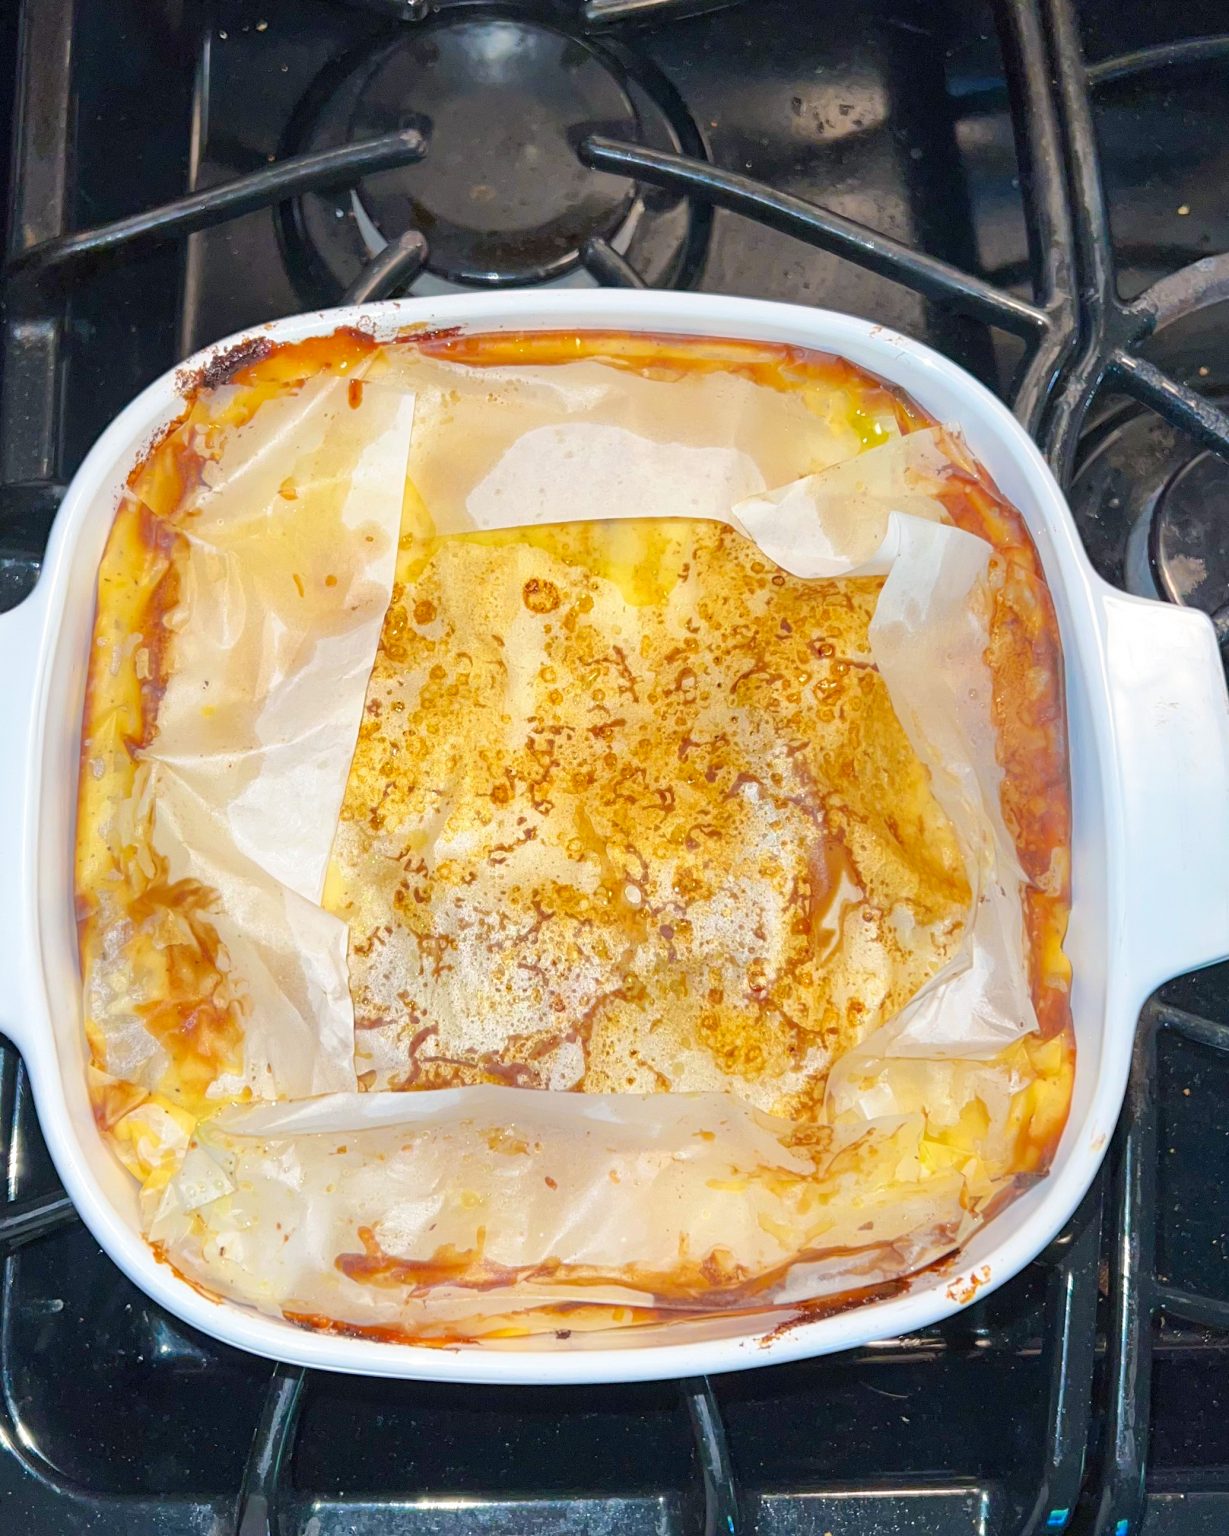 Here's my comforting, easy ingredient, Leon's Oyster Shop copycat Scalloped Potatoes by Hoang Vi Fessenden.